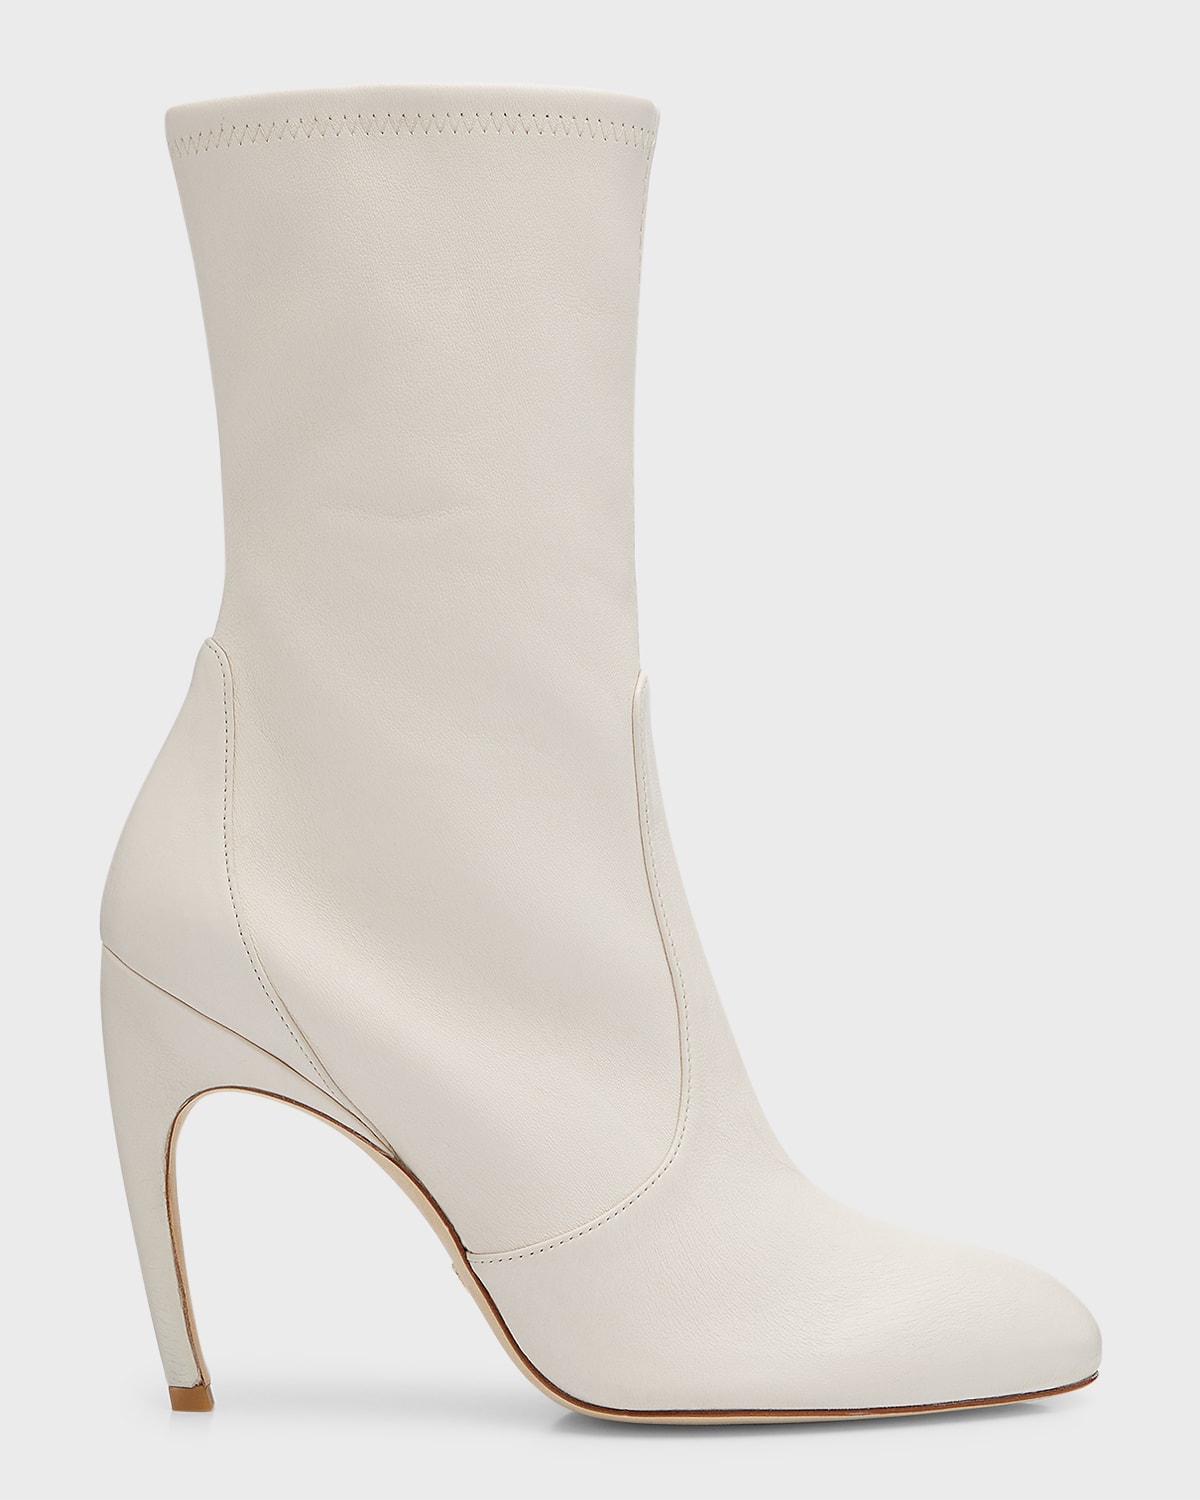 STUART WEITZMAN LUXECURVE STRETCH LEATHER ANKLE BOOTIES